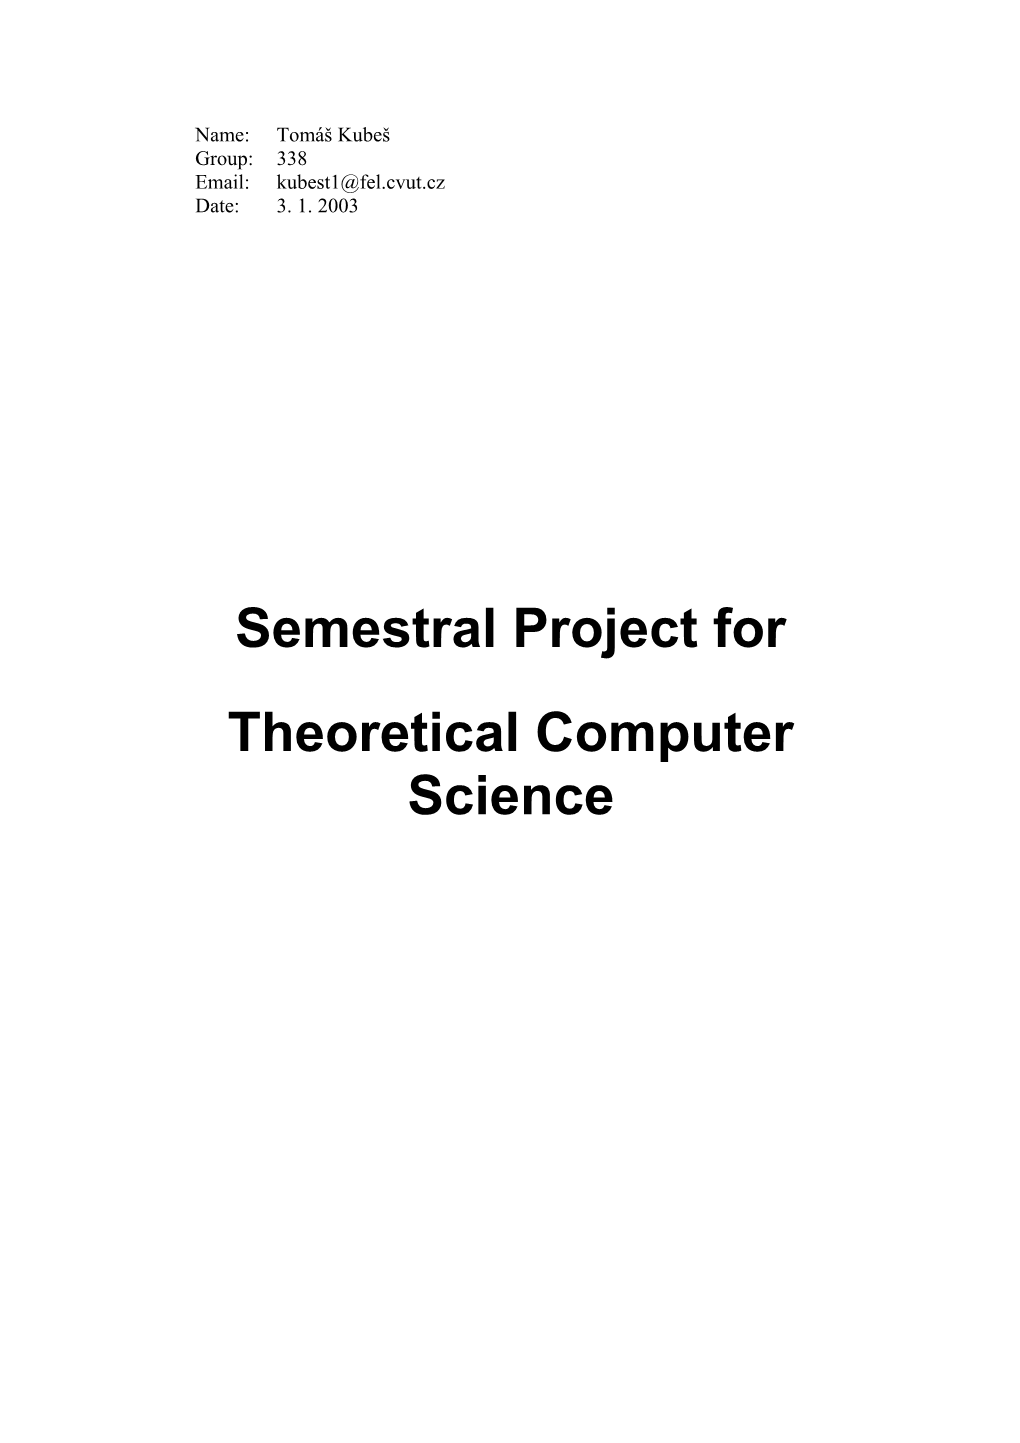 Semestral Project For